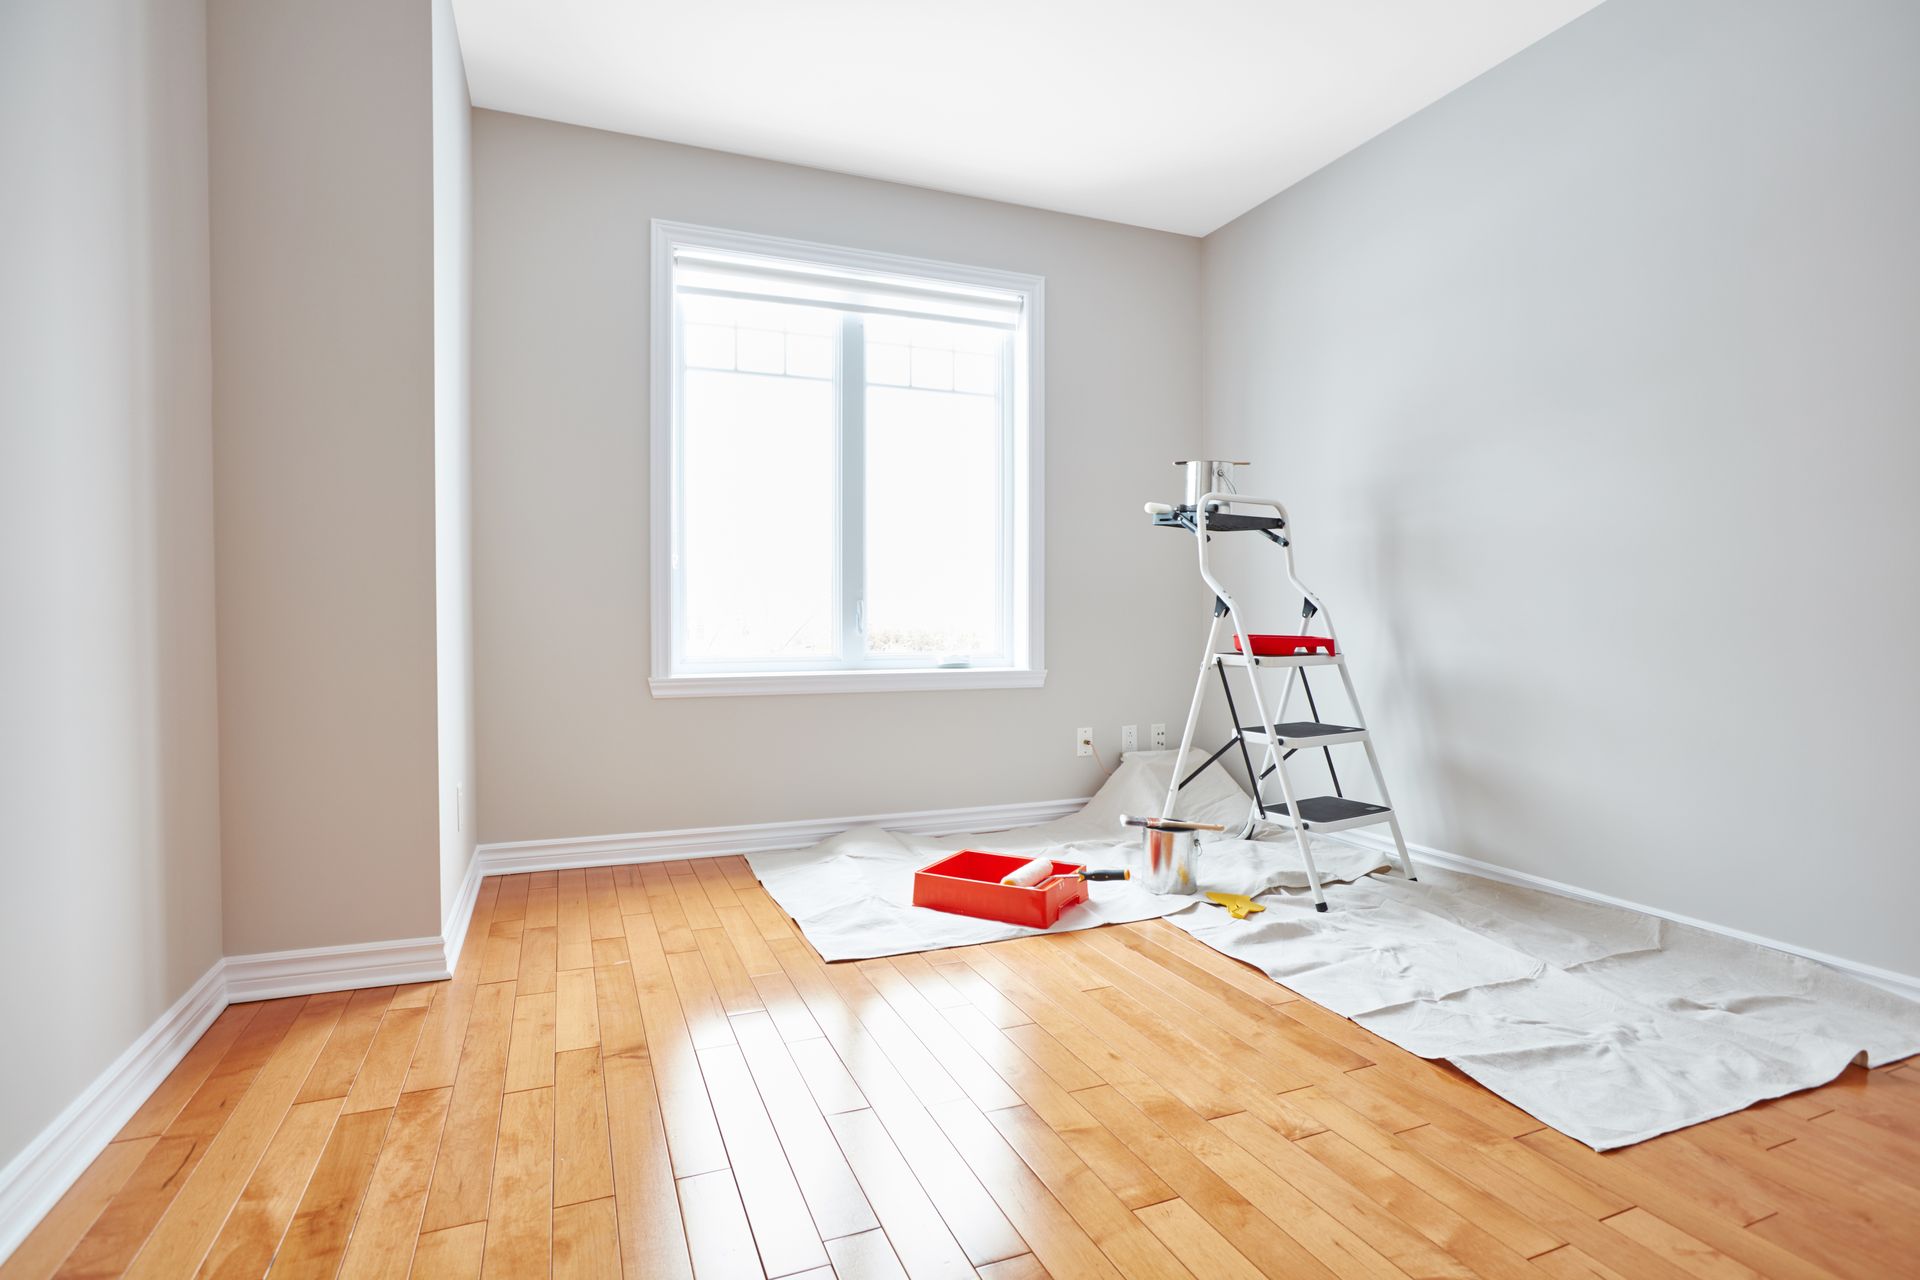 A freshly painted interior of a room with gray walls and white ceiling.